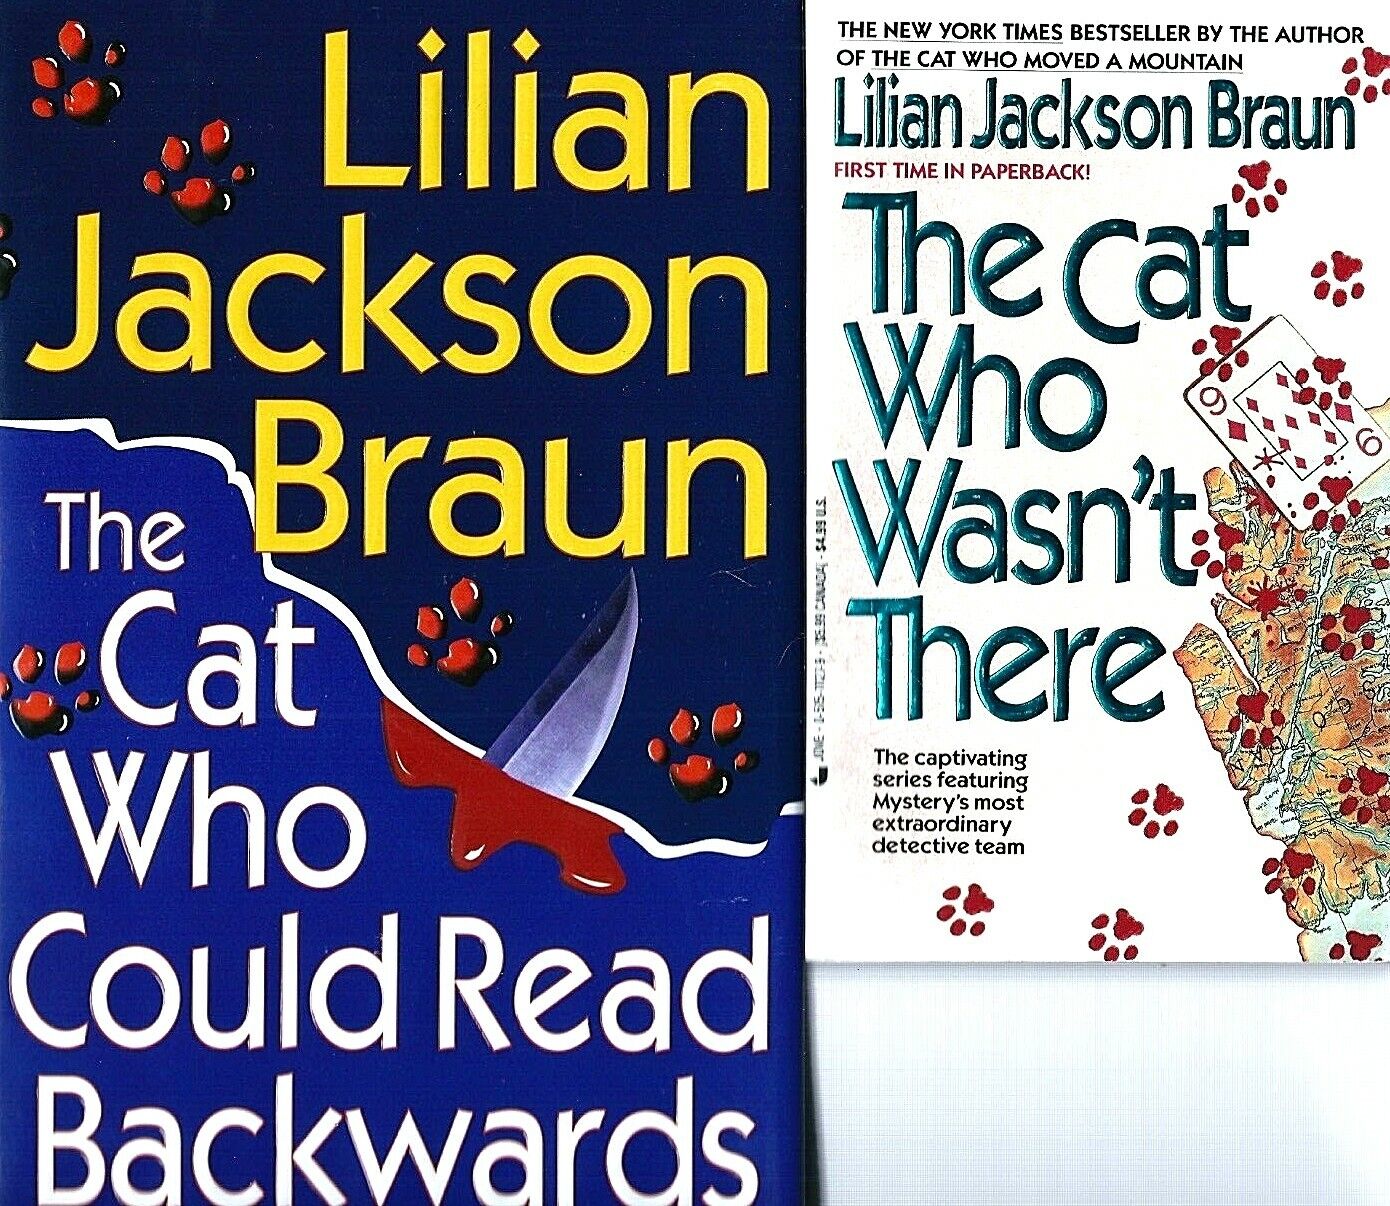 Lot 2 The Cat Who Mysteries by Lilian Jackson Braun Read Backwards, Wasn't There